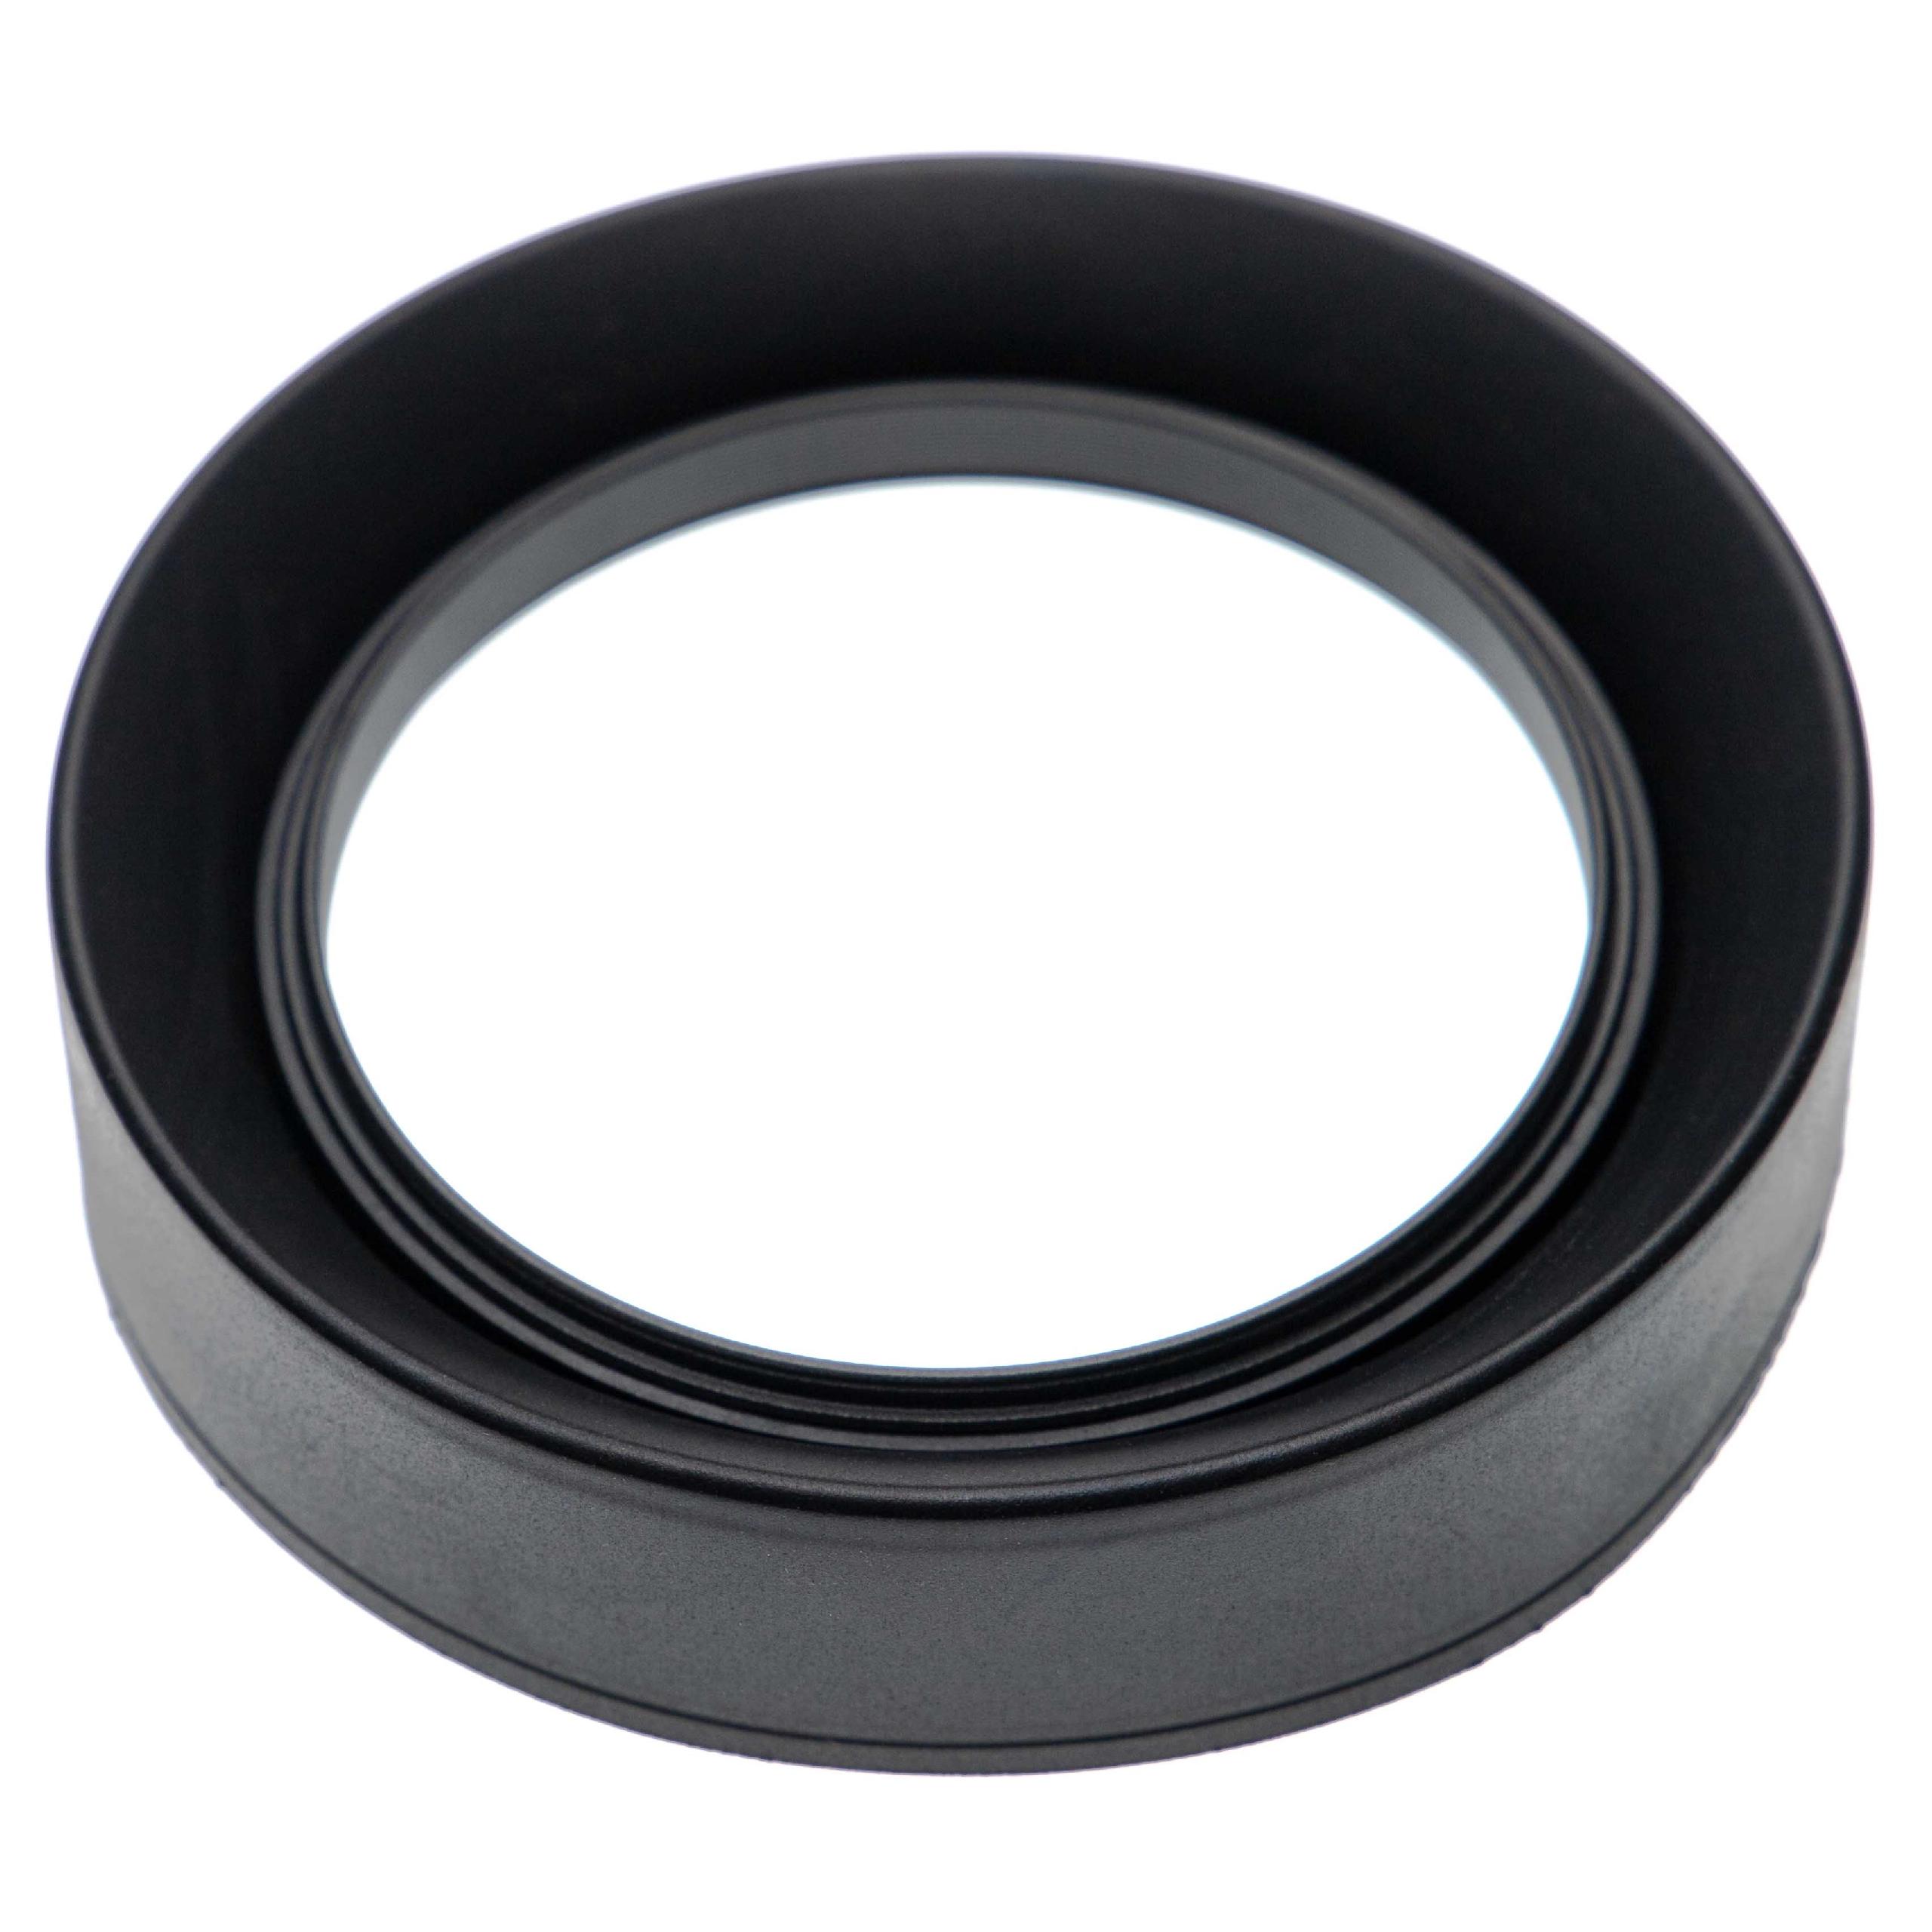 Lens Hood suitable for 82mm Lens - Foldable Lens Shade, with Filter Thread Black, Round, 27 - 56 cm